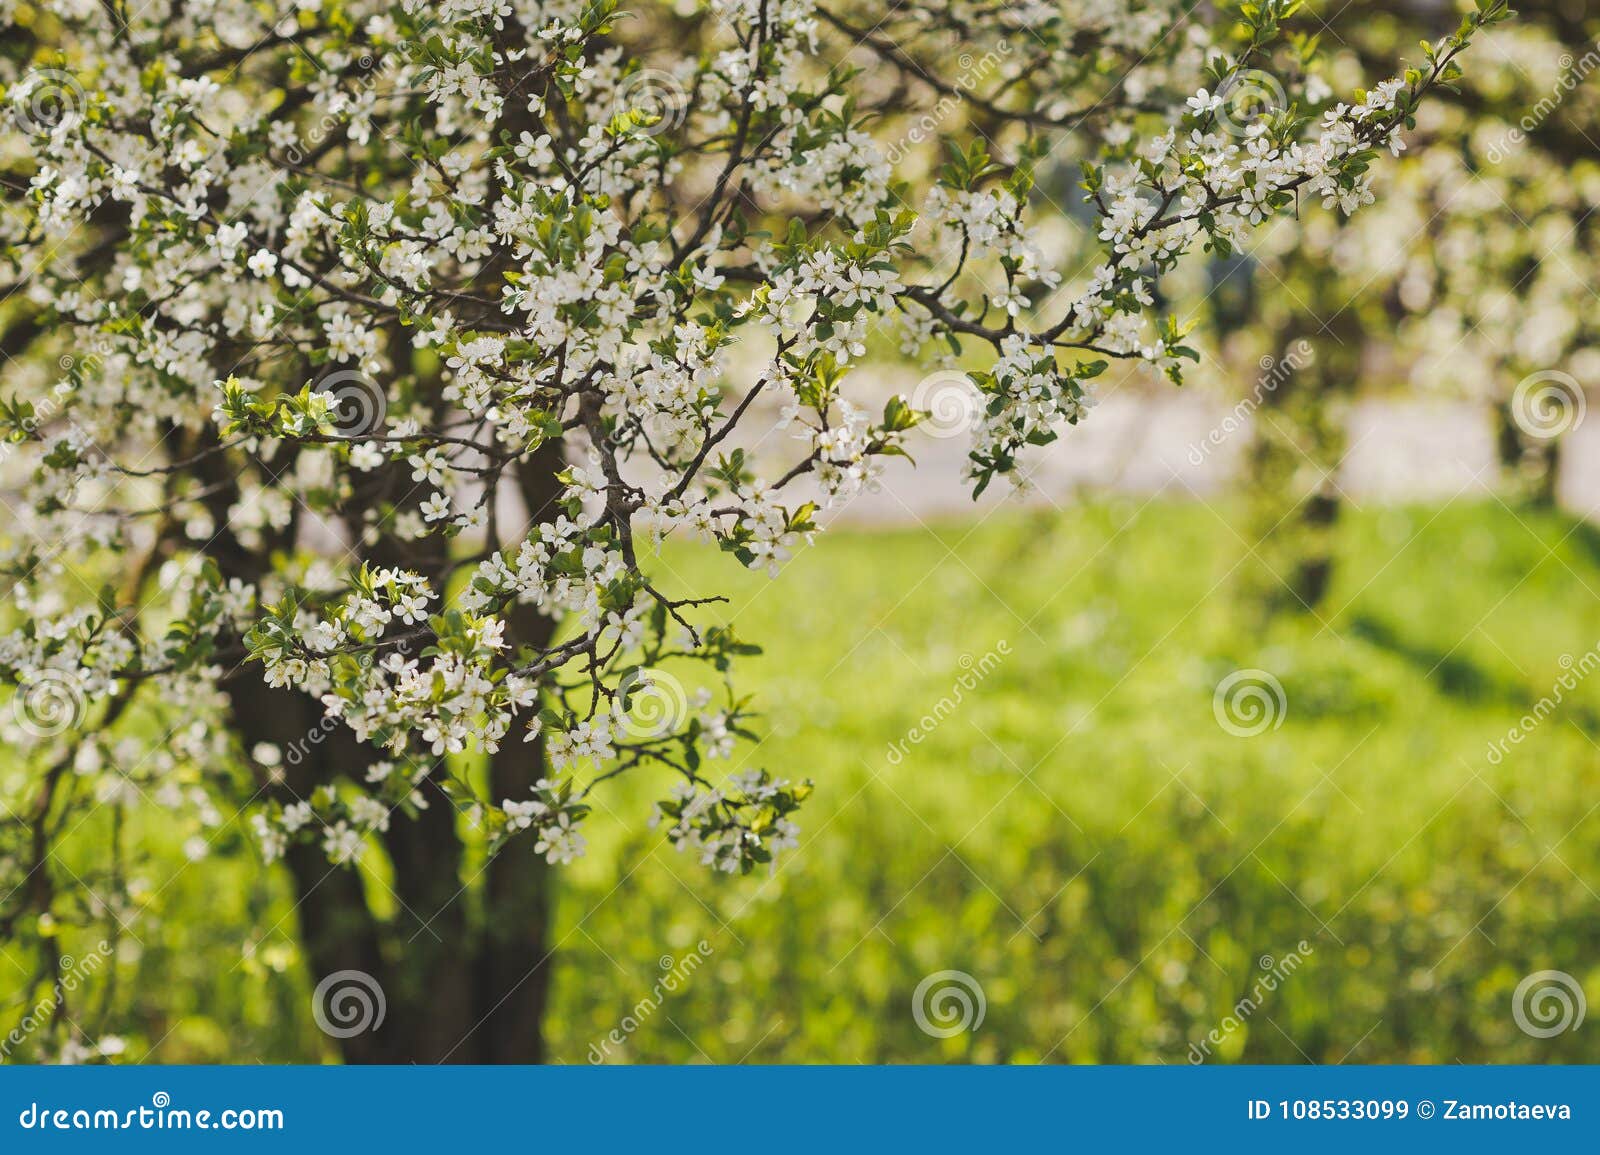 White Cherry Blossoms in the Spring 8916. Stock Image - Image of fresh ...